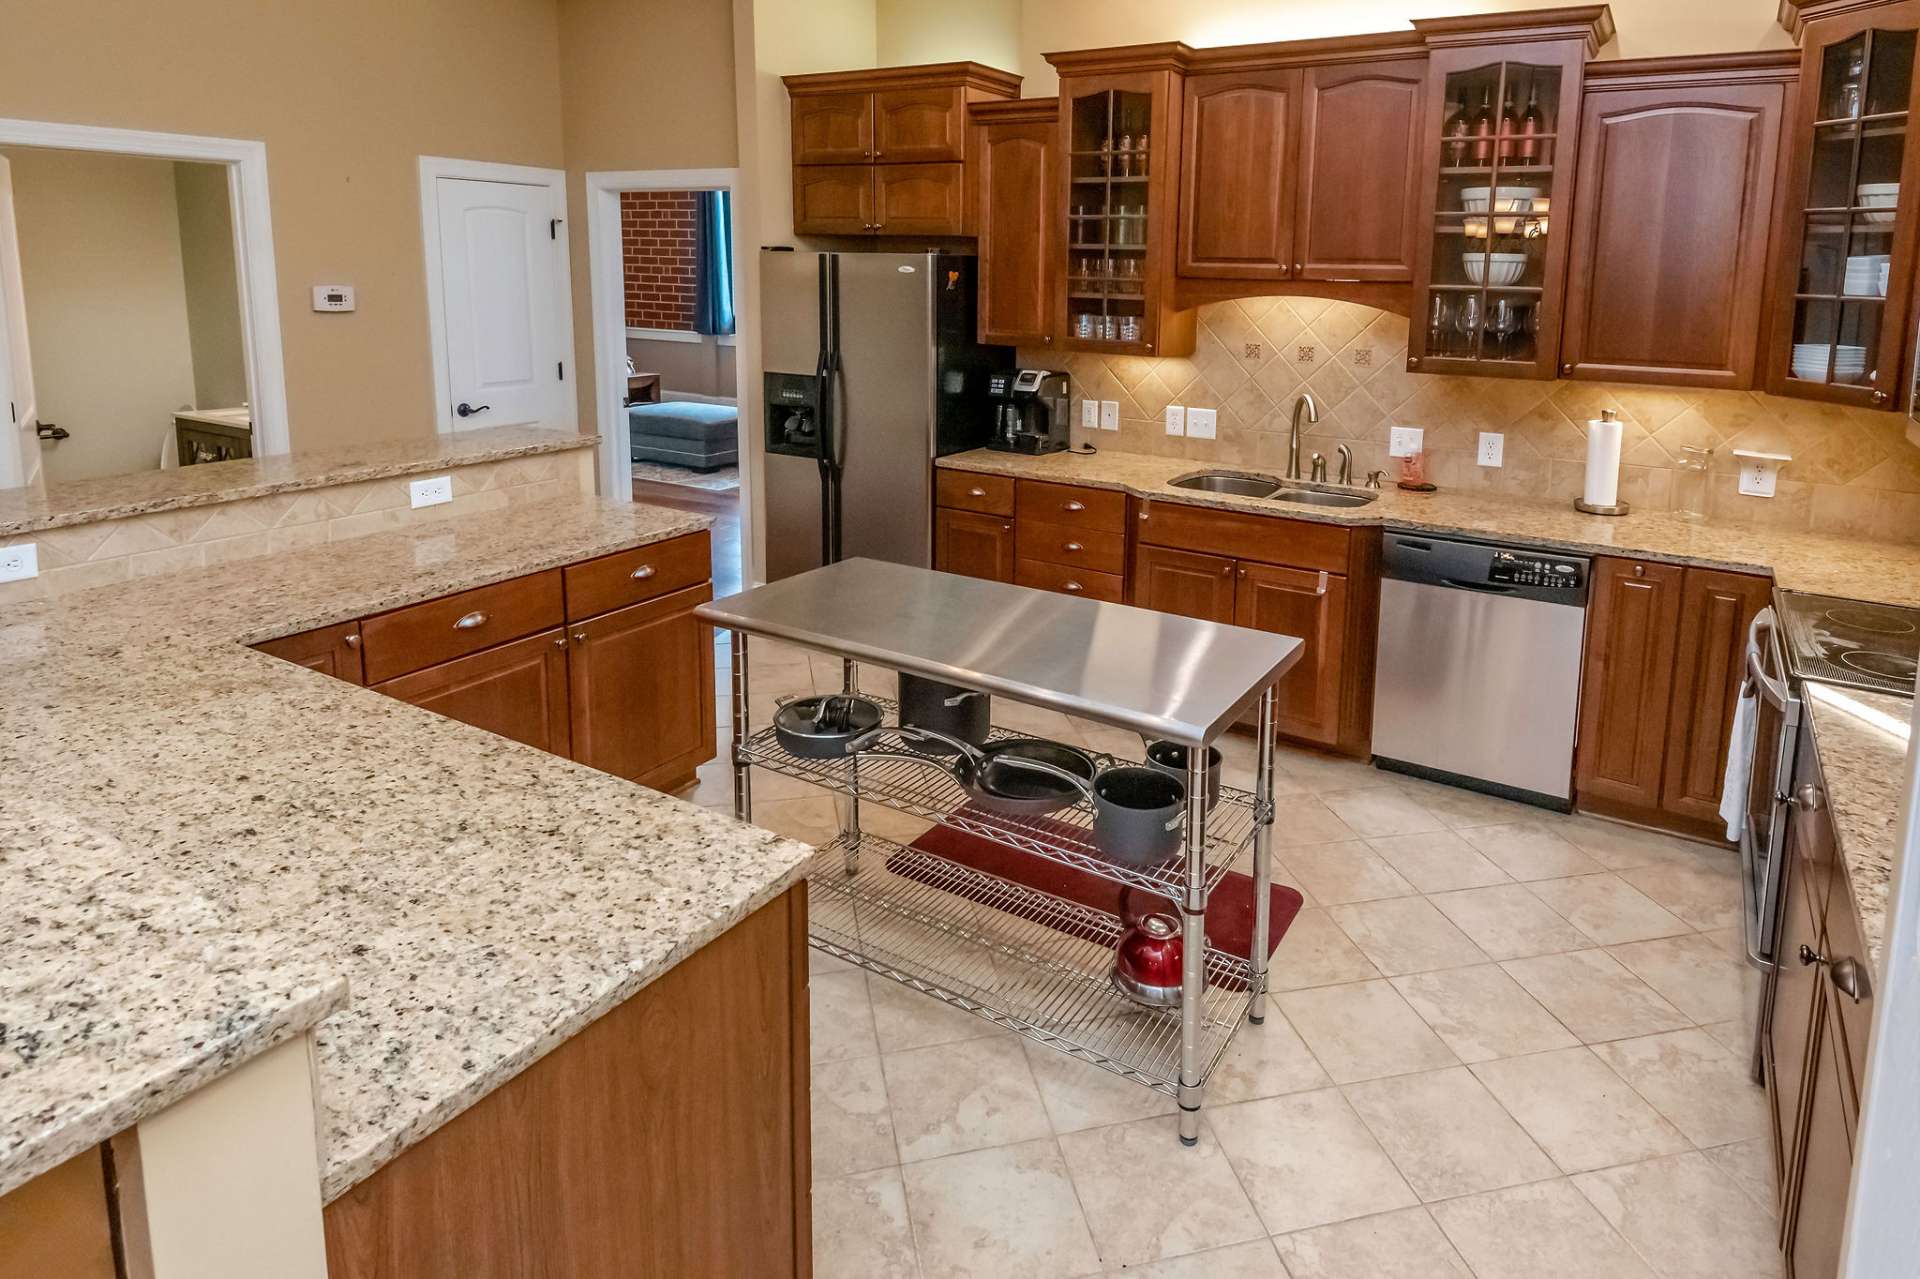 The spacious counter tops are prefect for entertaining or working on your most loved kitchen creations.